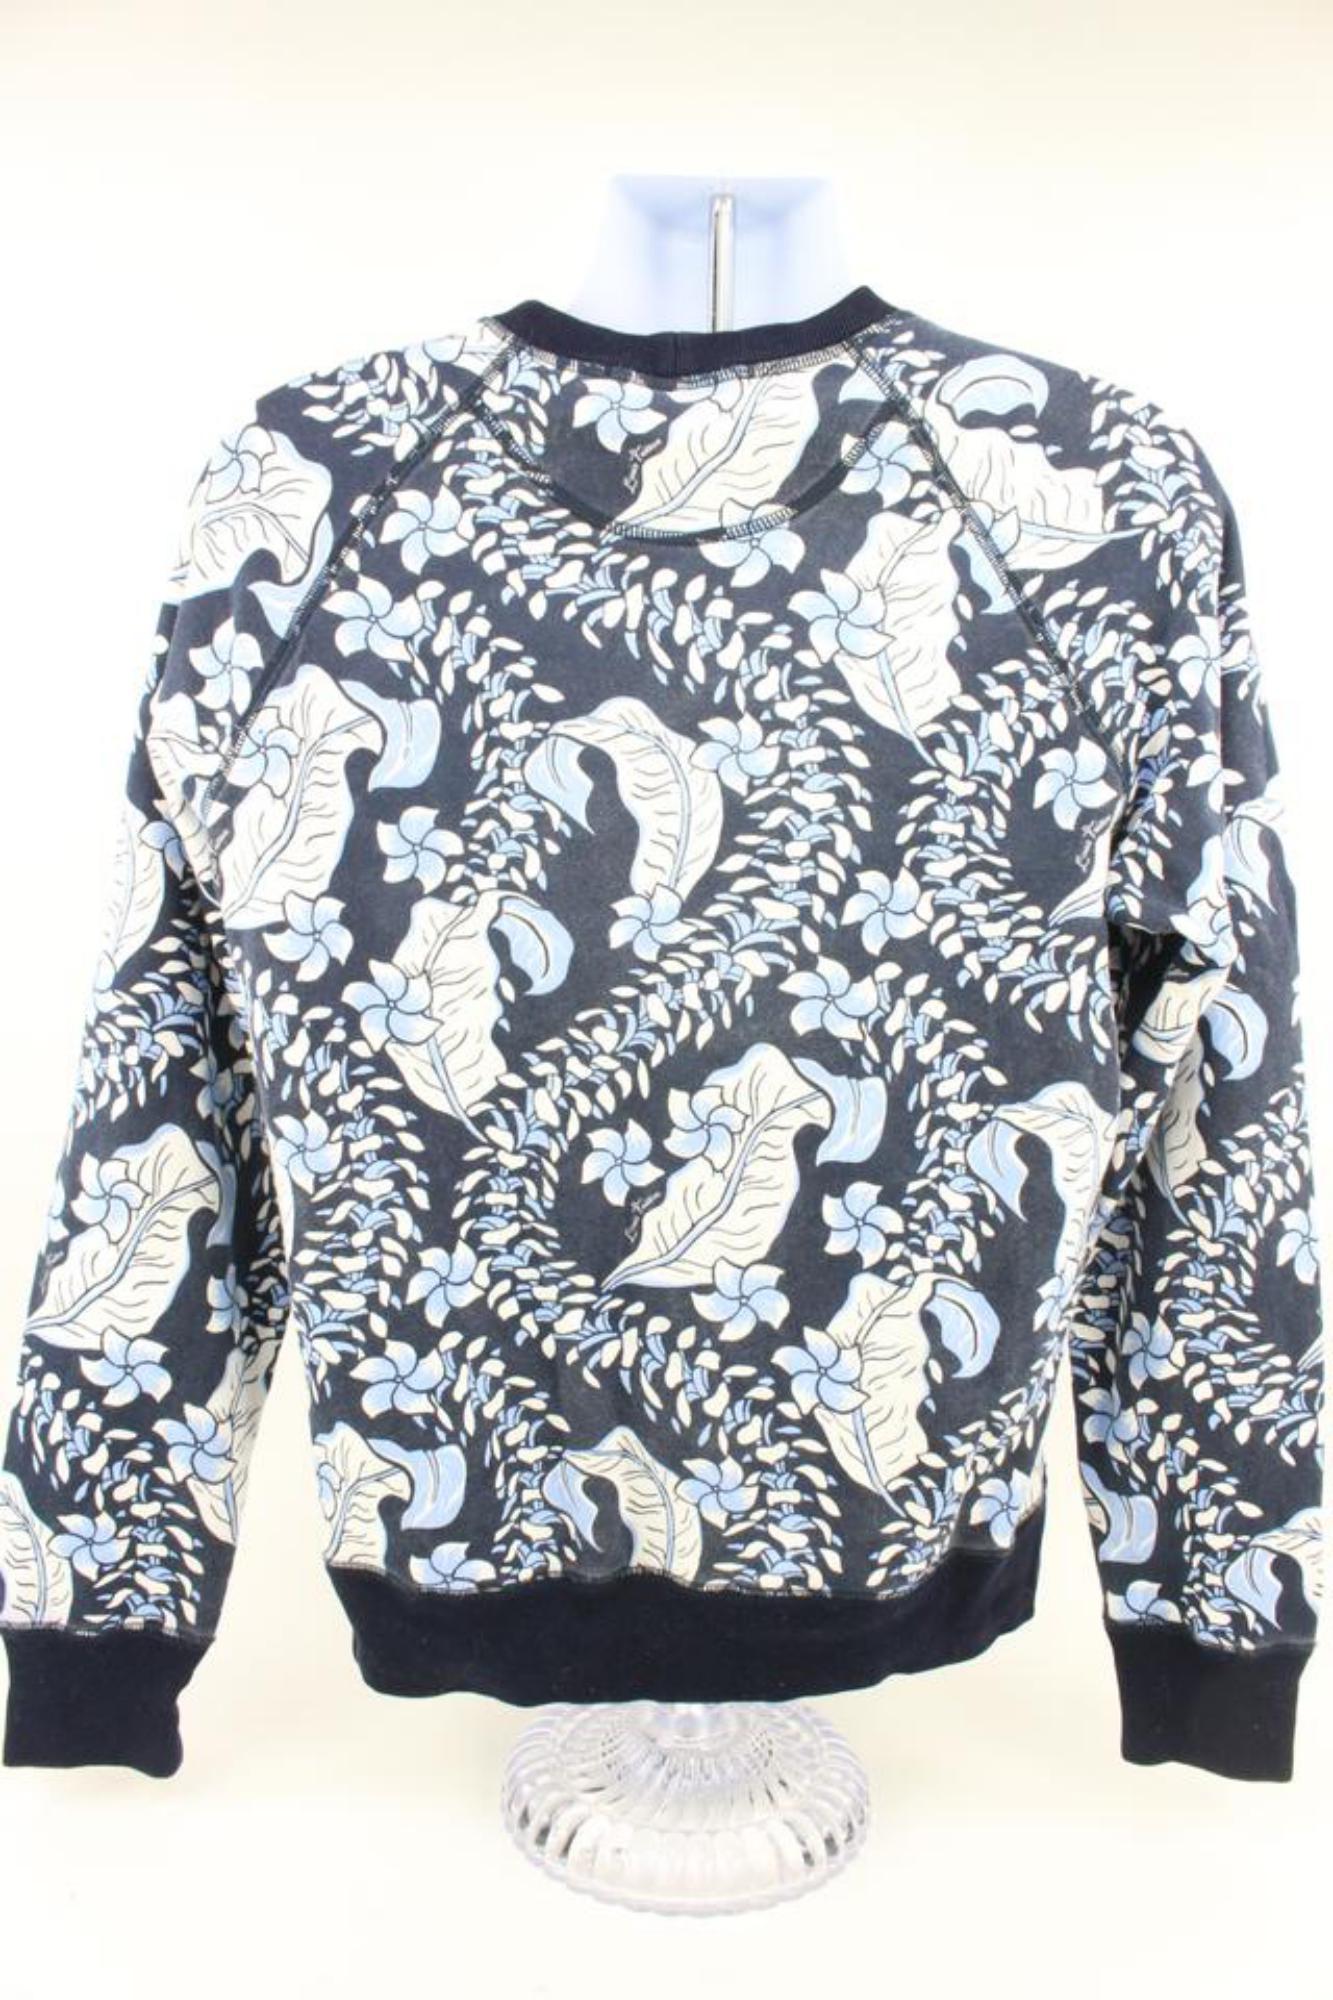 Louis Vuitton Men's XL LV Varsity All Over Leaf Printed Floral Sweatshirt 2LV415 In Excellent Condition For Sale In Dix hills, NY